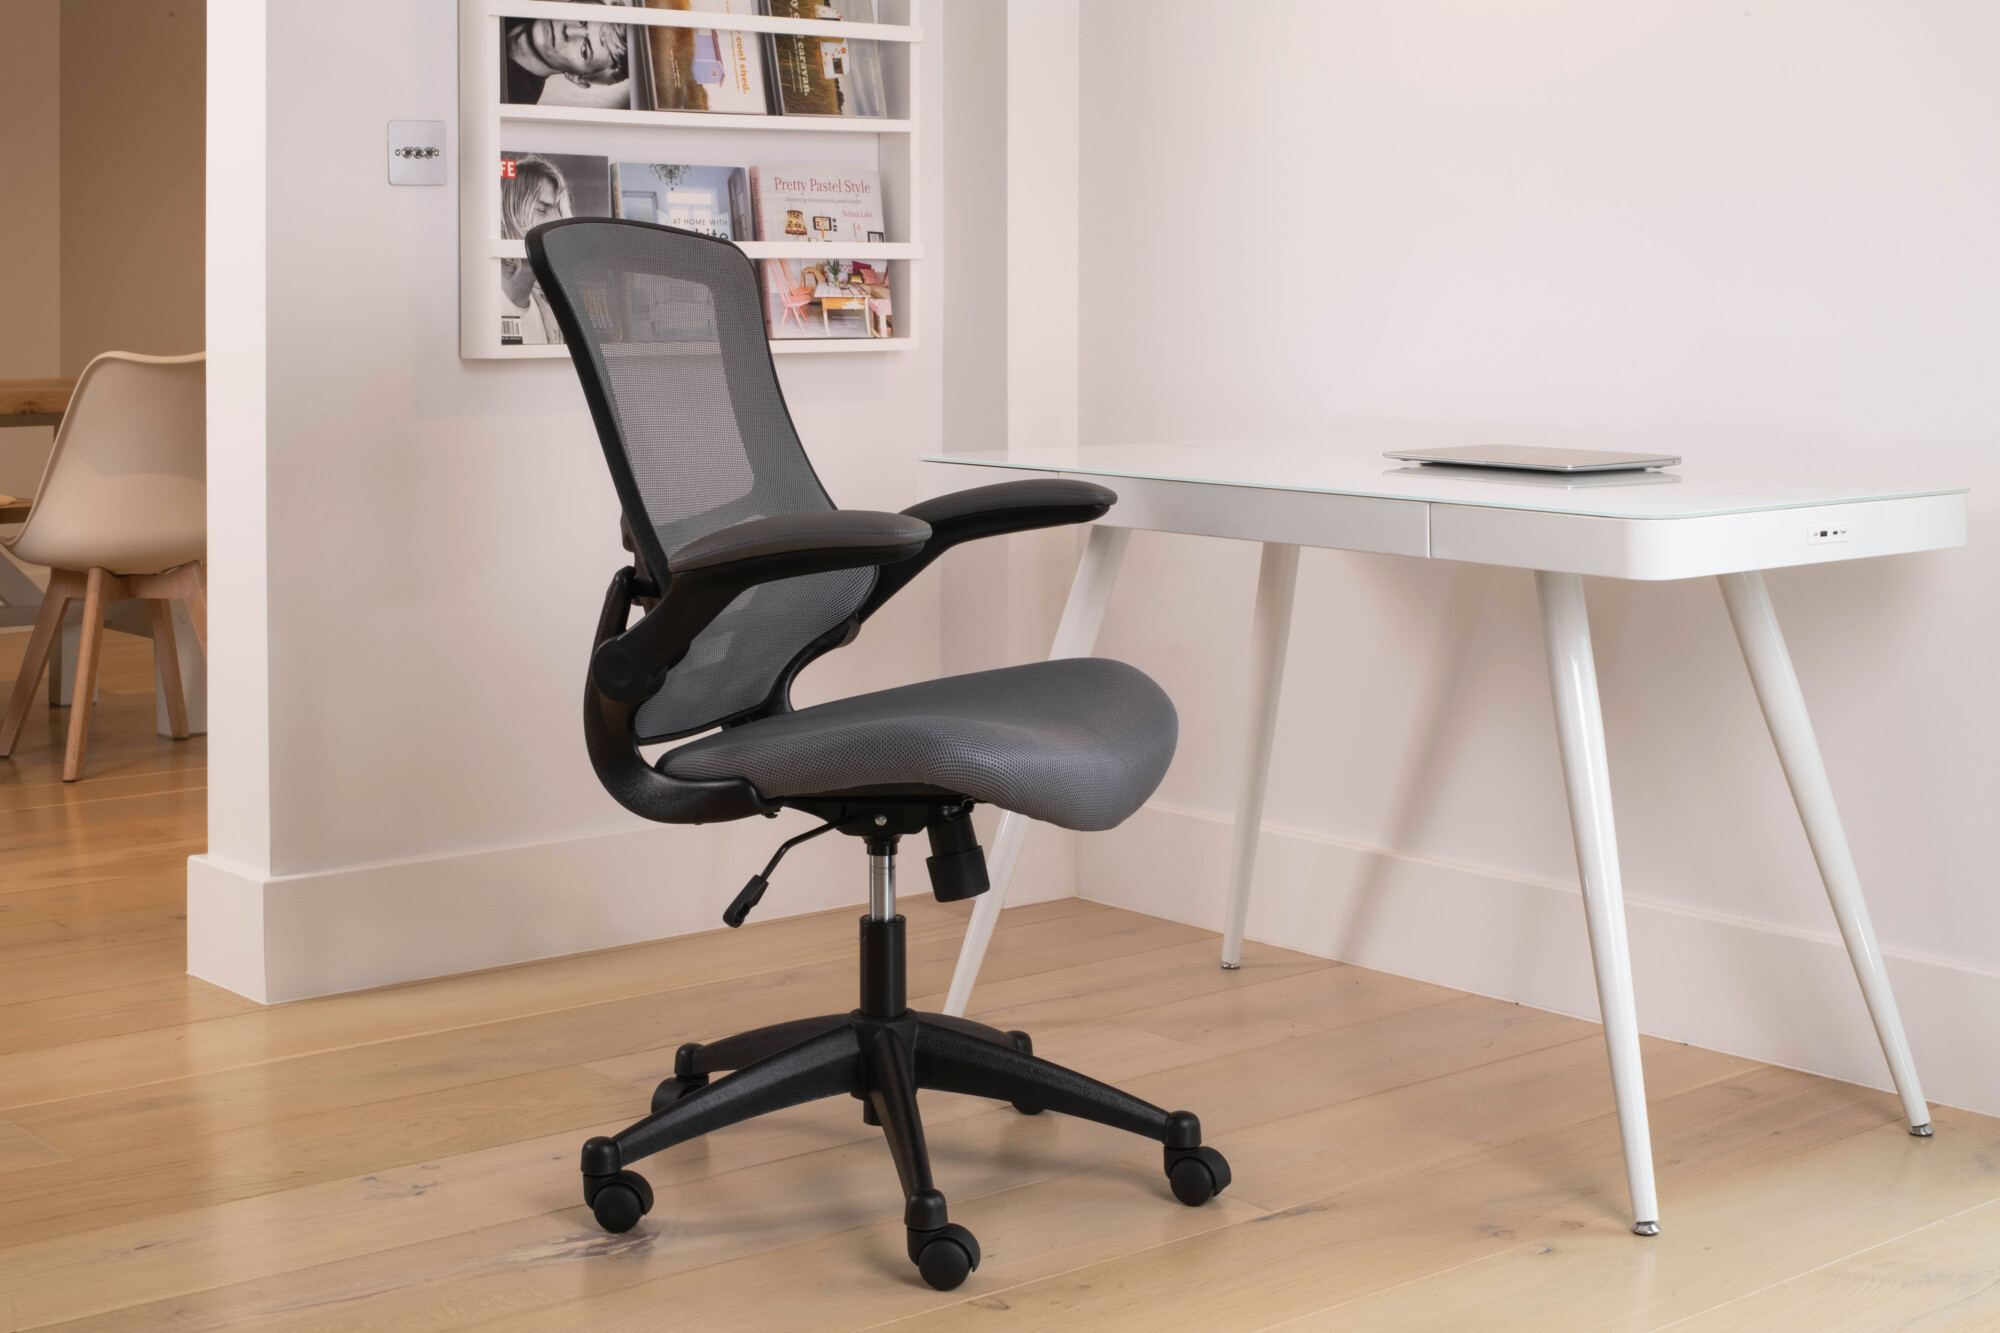 The Lukas by Koble Designs is a black mesh and white upholstered ergonomic home office chair providing comfort and personalisation.